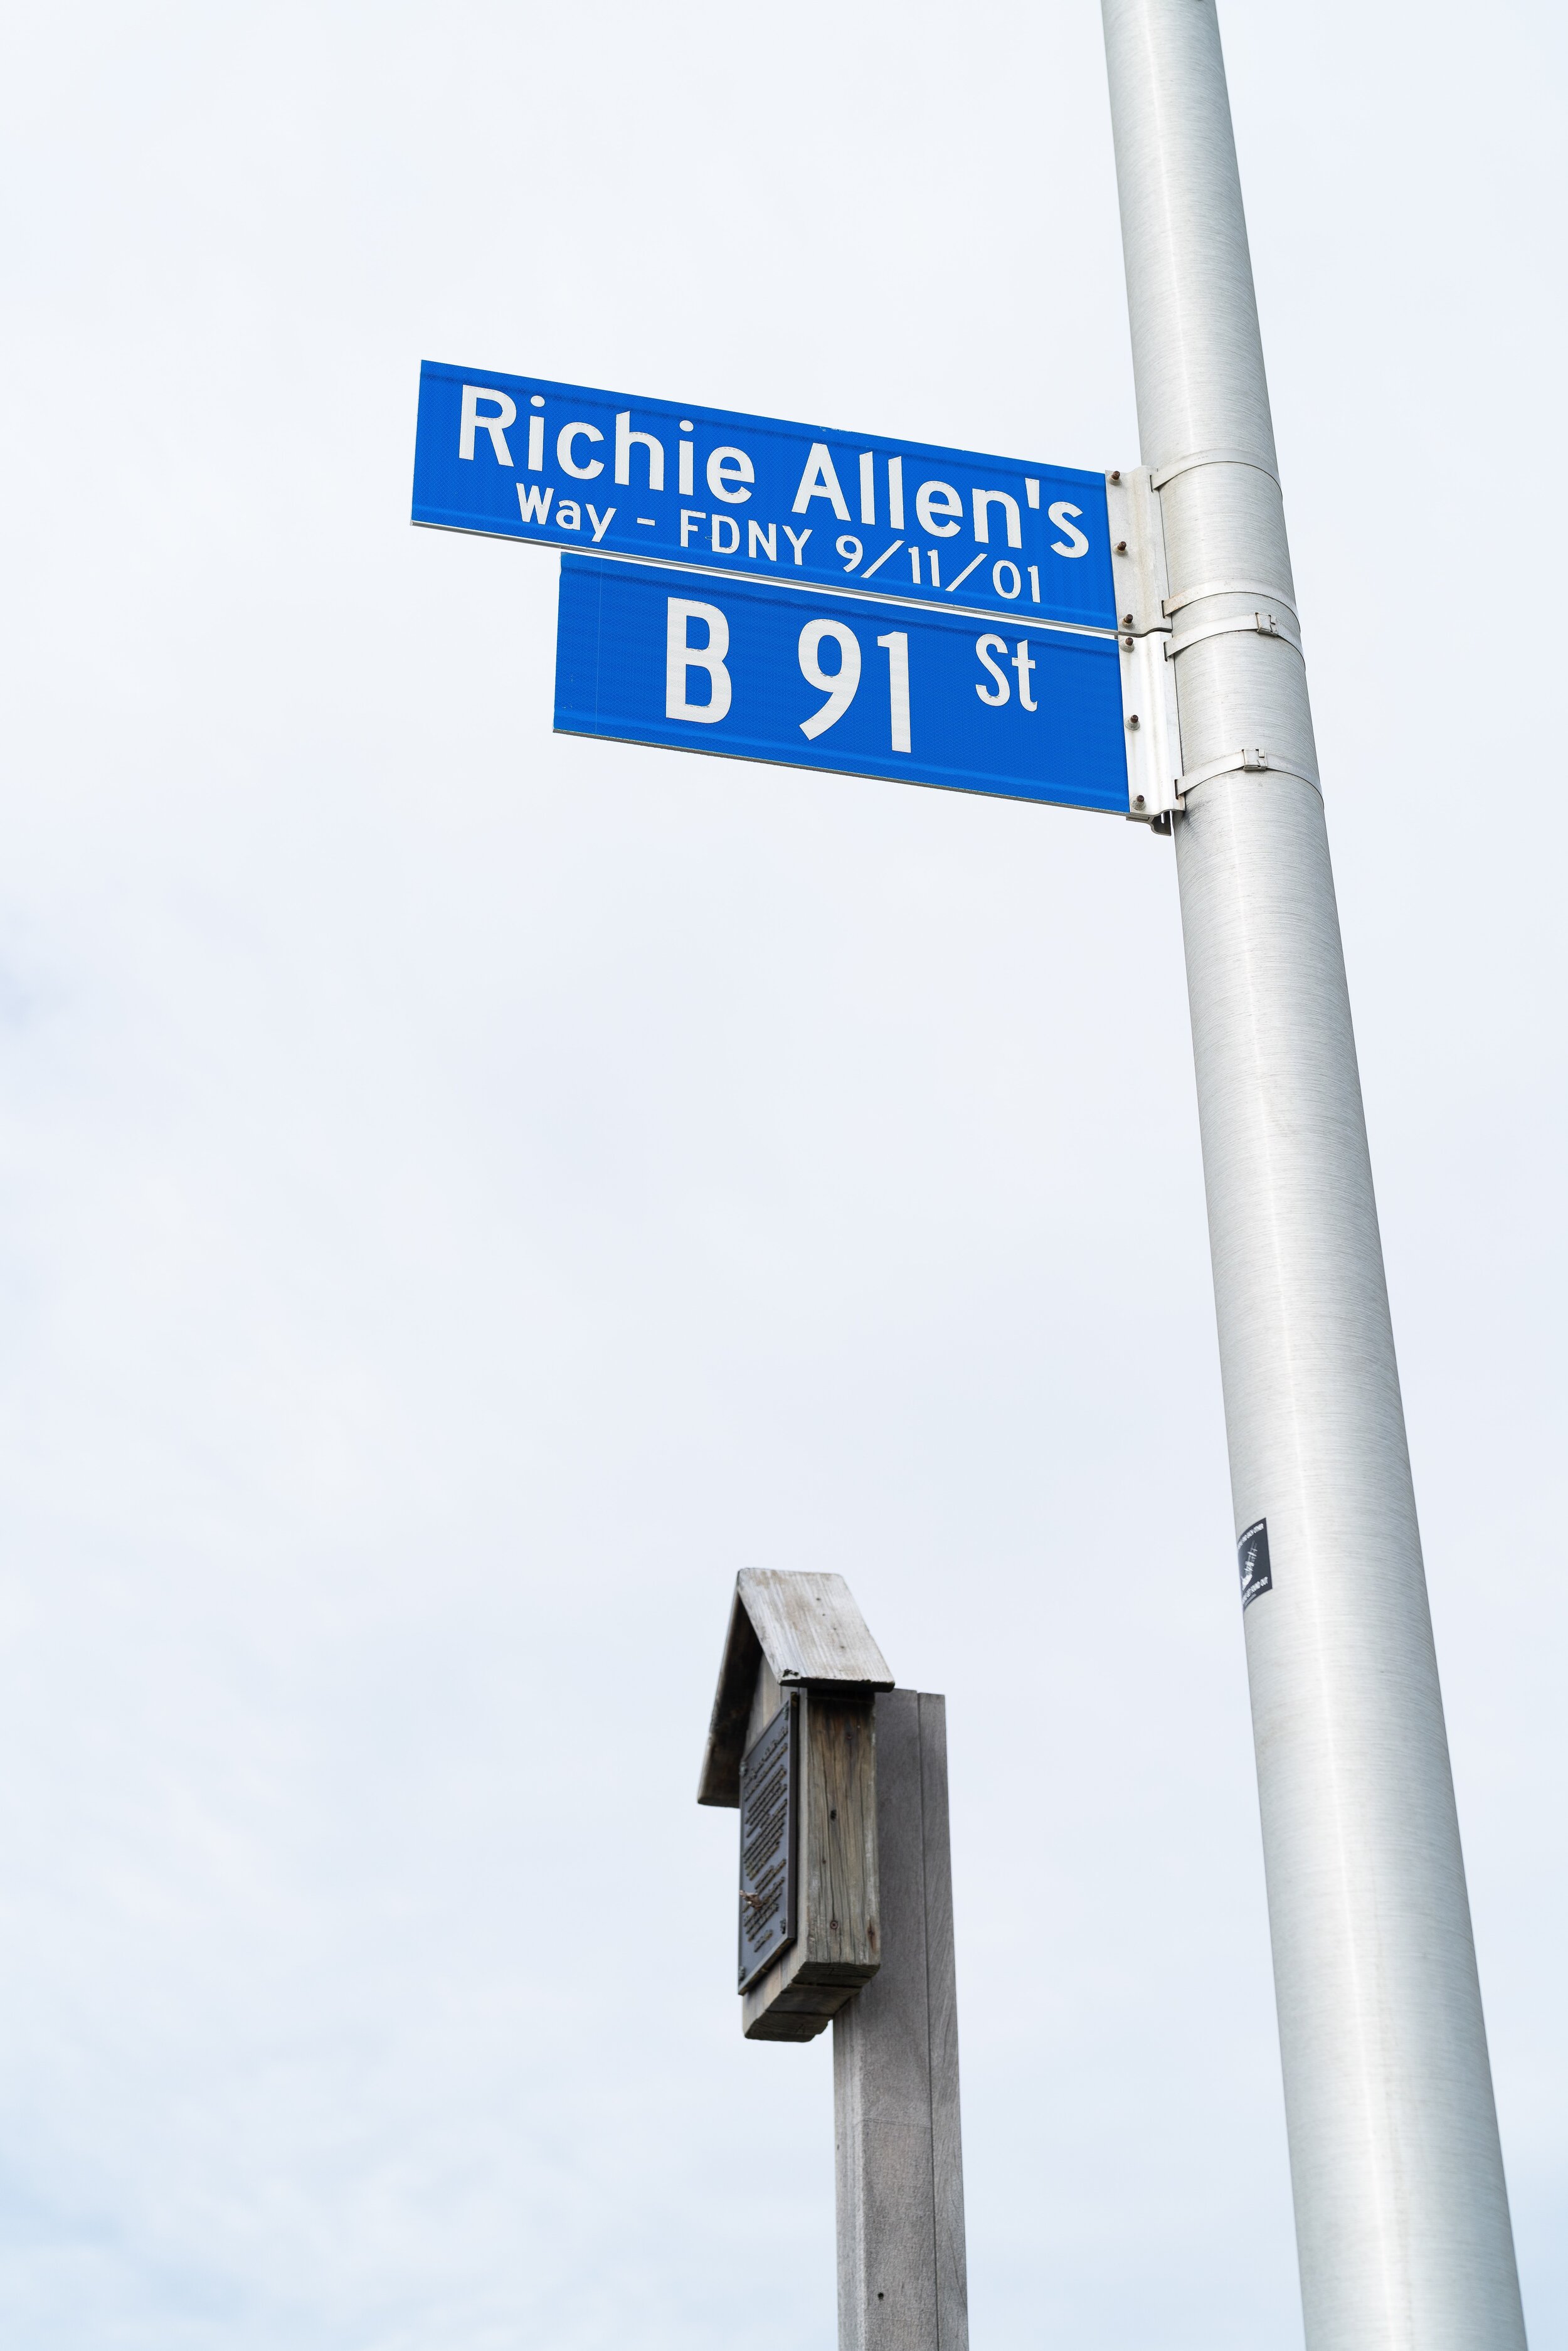   Beach 91st Street is where Richie Allen used to surf and it was renamed in his honor after he died as a firefighter responding to the 9/11 attacks.&nbsp;  